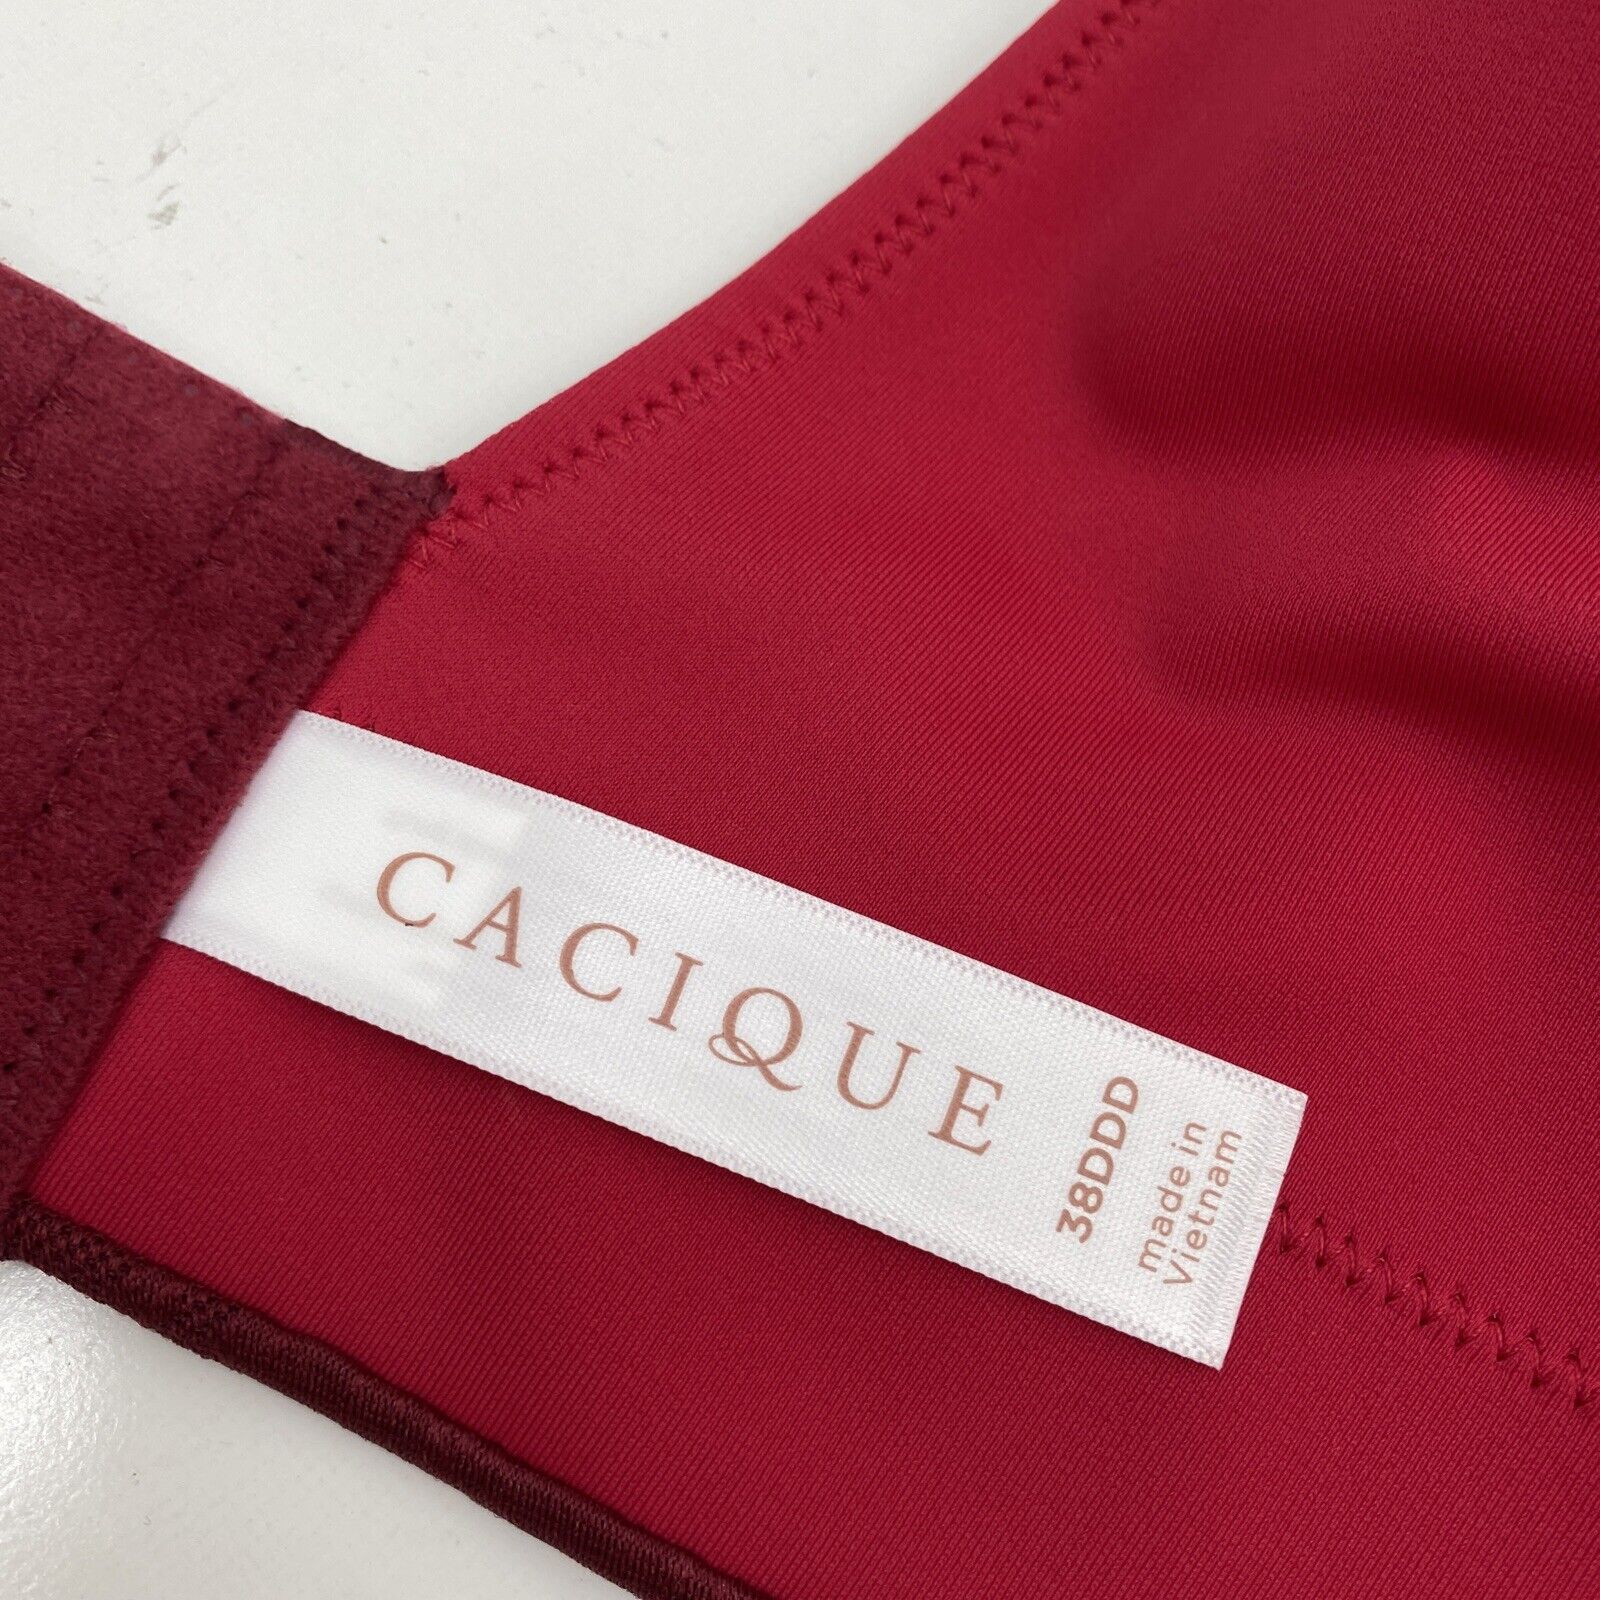 Cacique …red, gold accents…lightly - Gem